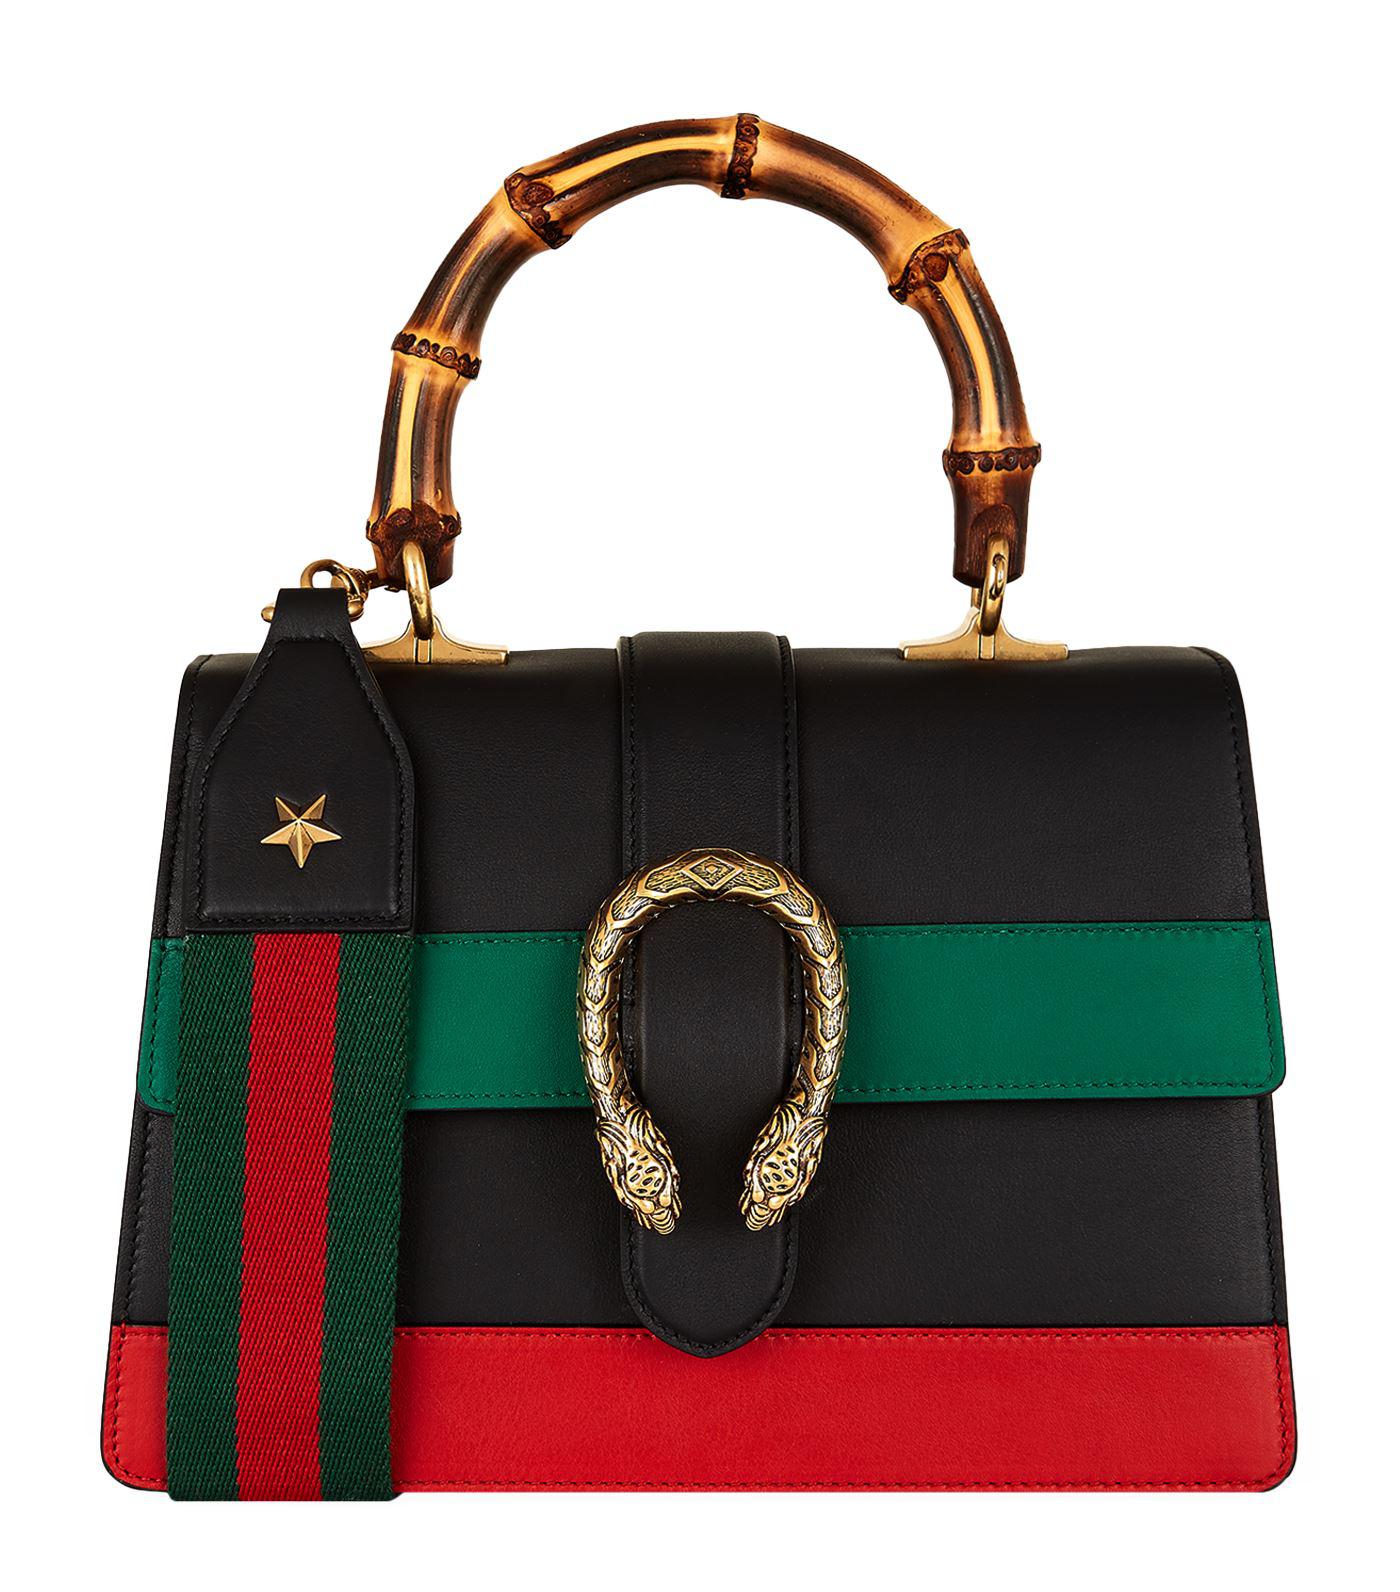 Lyst - Gucci Small Dionysus Stripe Bamboo Handle Bag